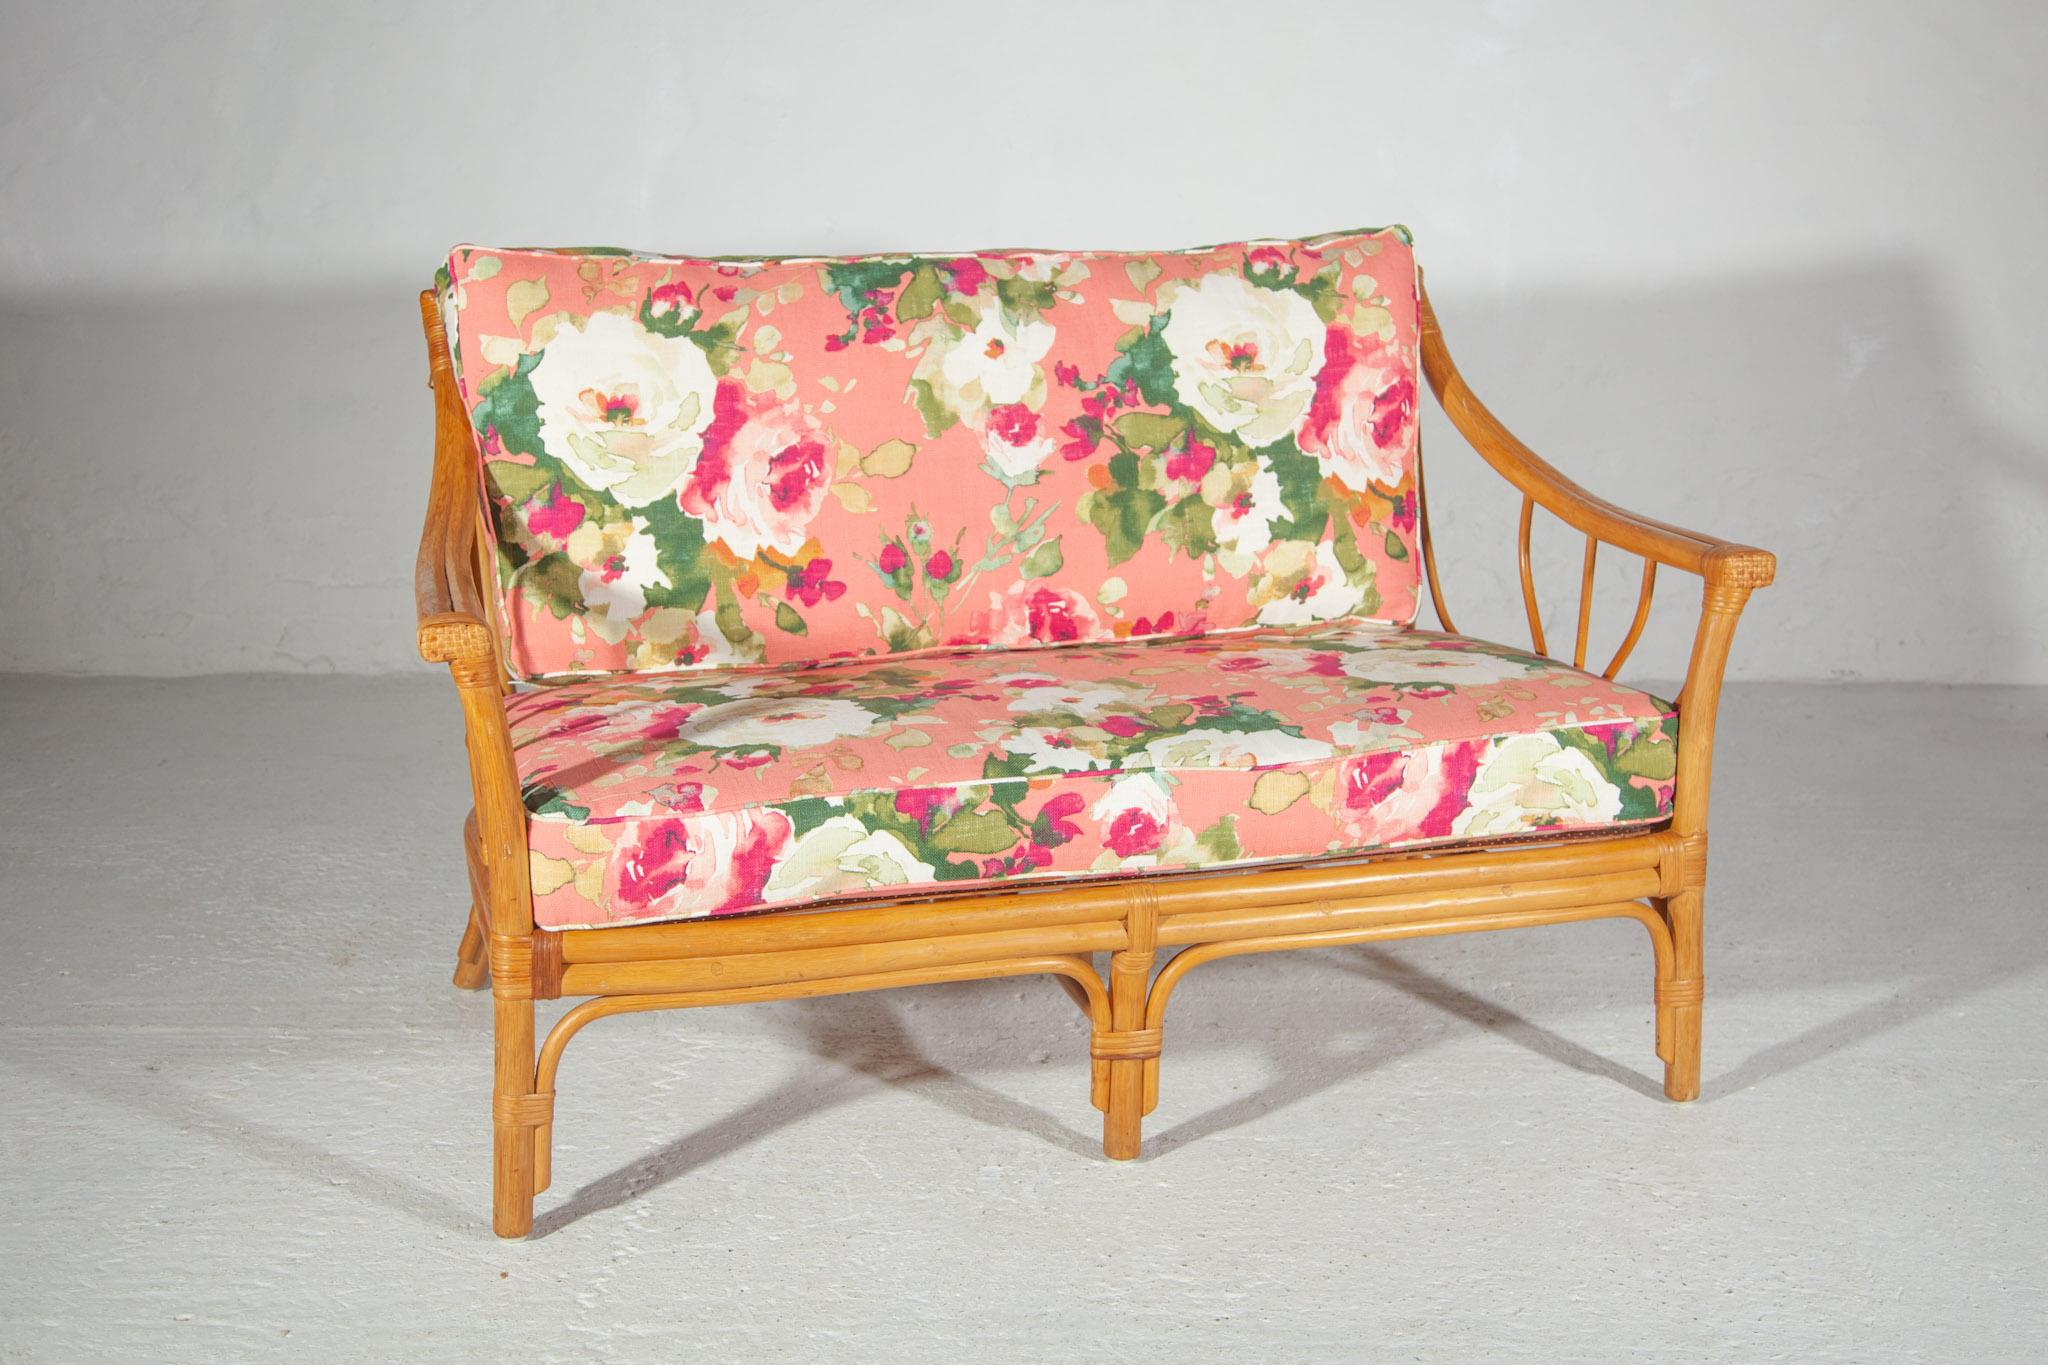 Very stylish quality vintage bamboo sofa, two-seater. The two-seater has renewed upholstered cushions in a soft color floral outdoor fabric. 
Includes two matching lounge chairs see our other upload. The set can be used well on your patio or in